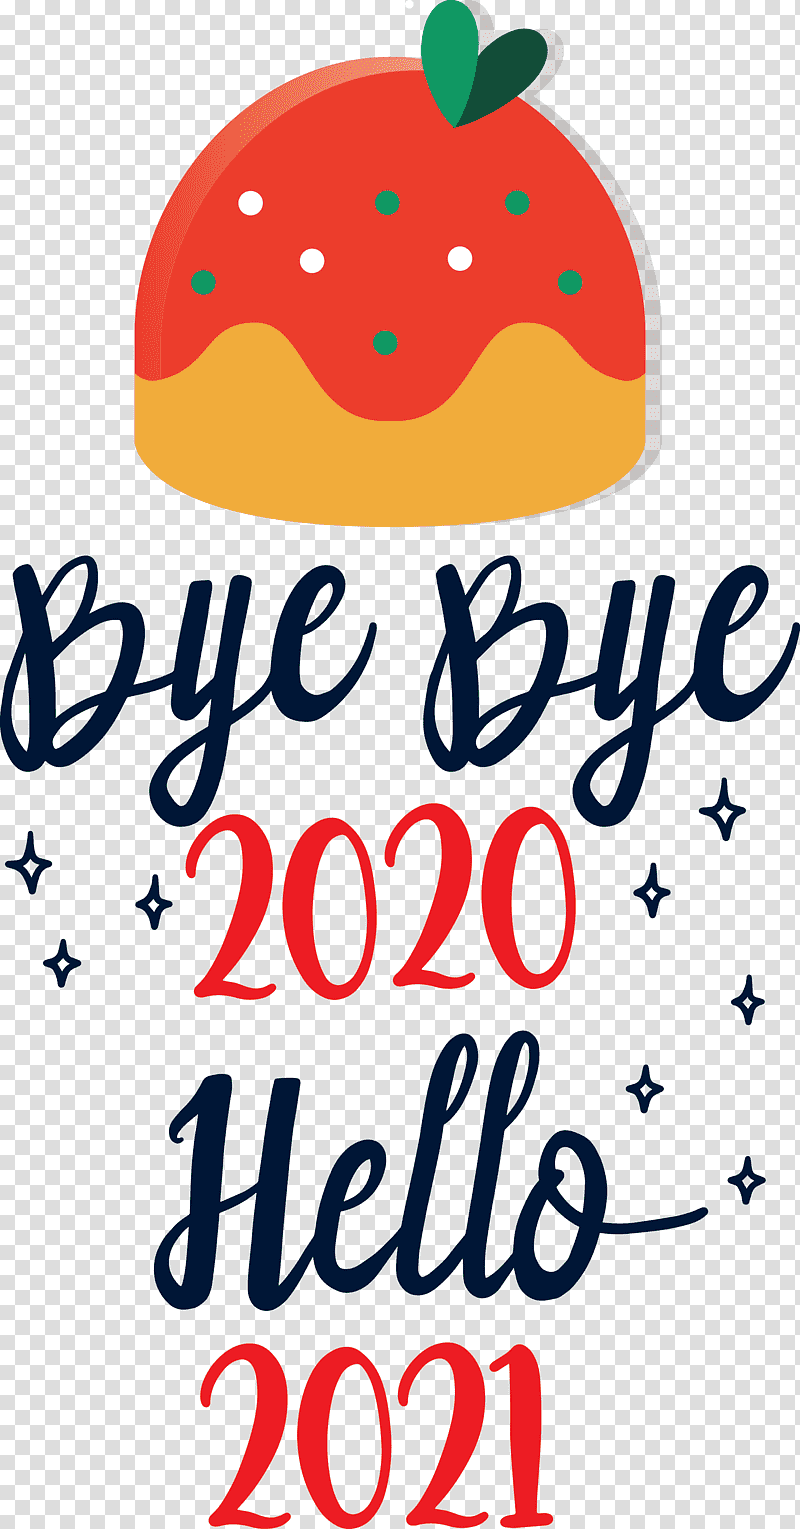 Hello 2021 Year Bye bye 2020 Year, World Aids Day, Bodhi Day, All Saints Day, All Souls Day, Christ The King, St Andrews Day transparent background PNG clipart